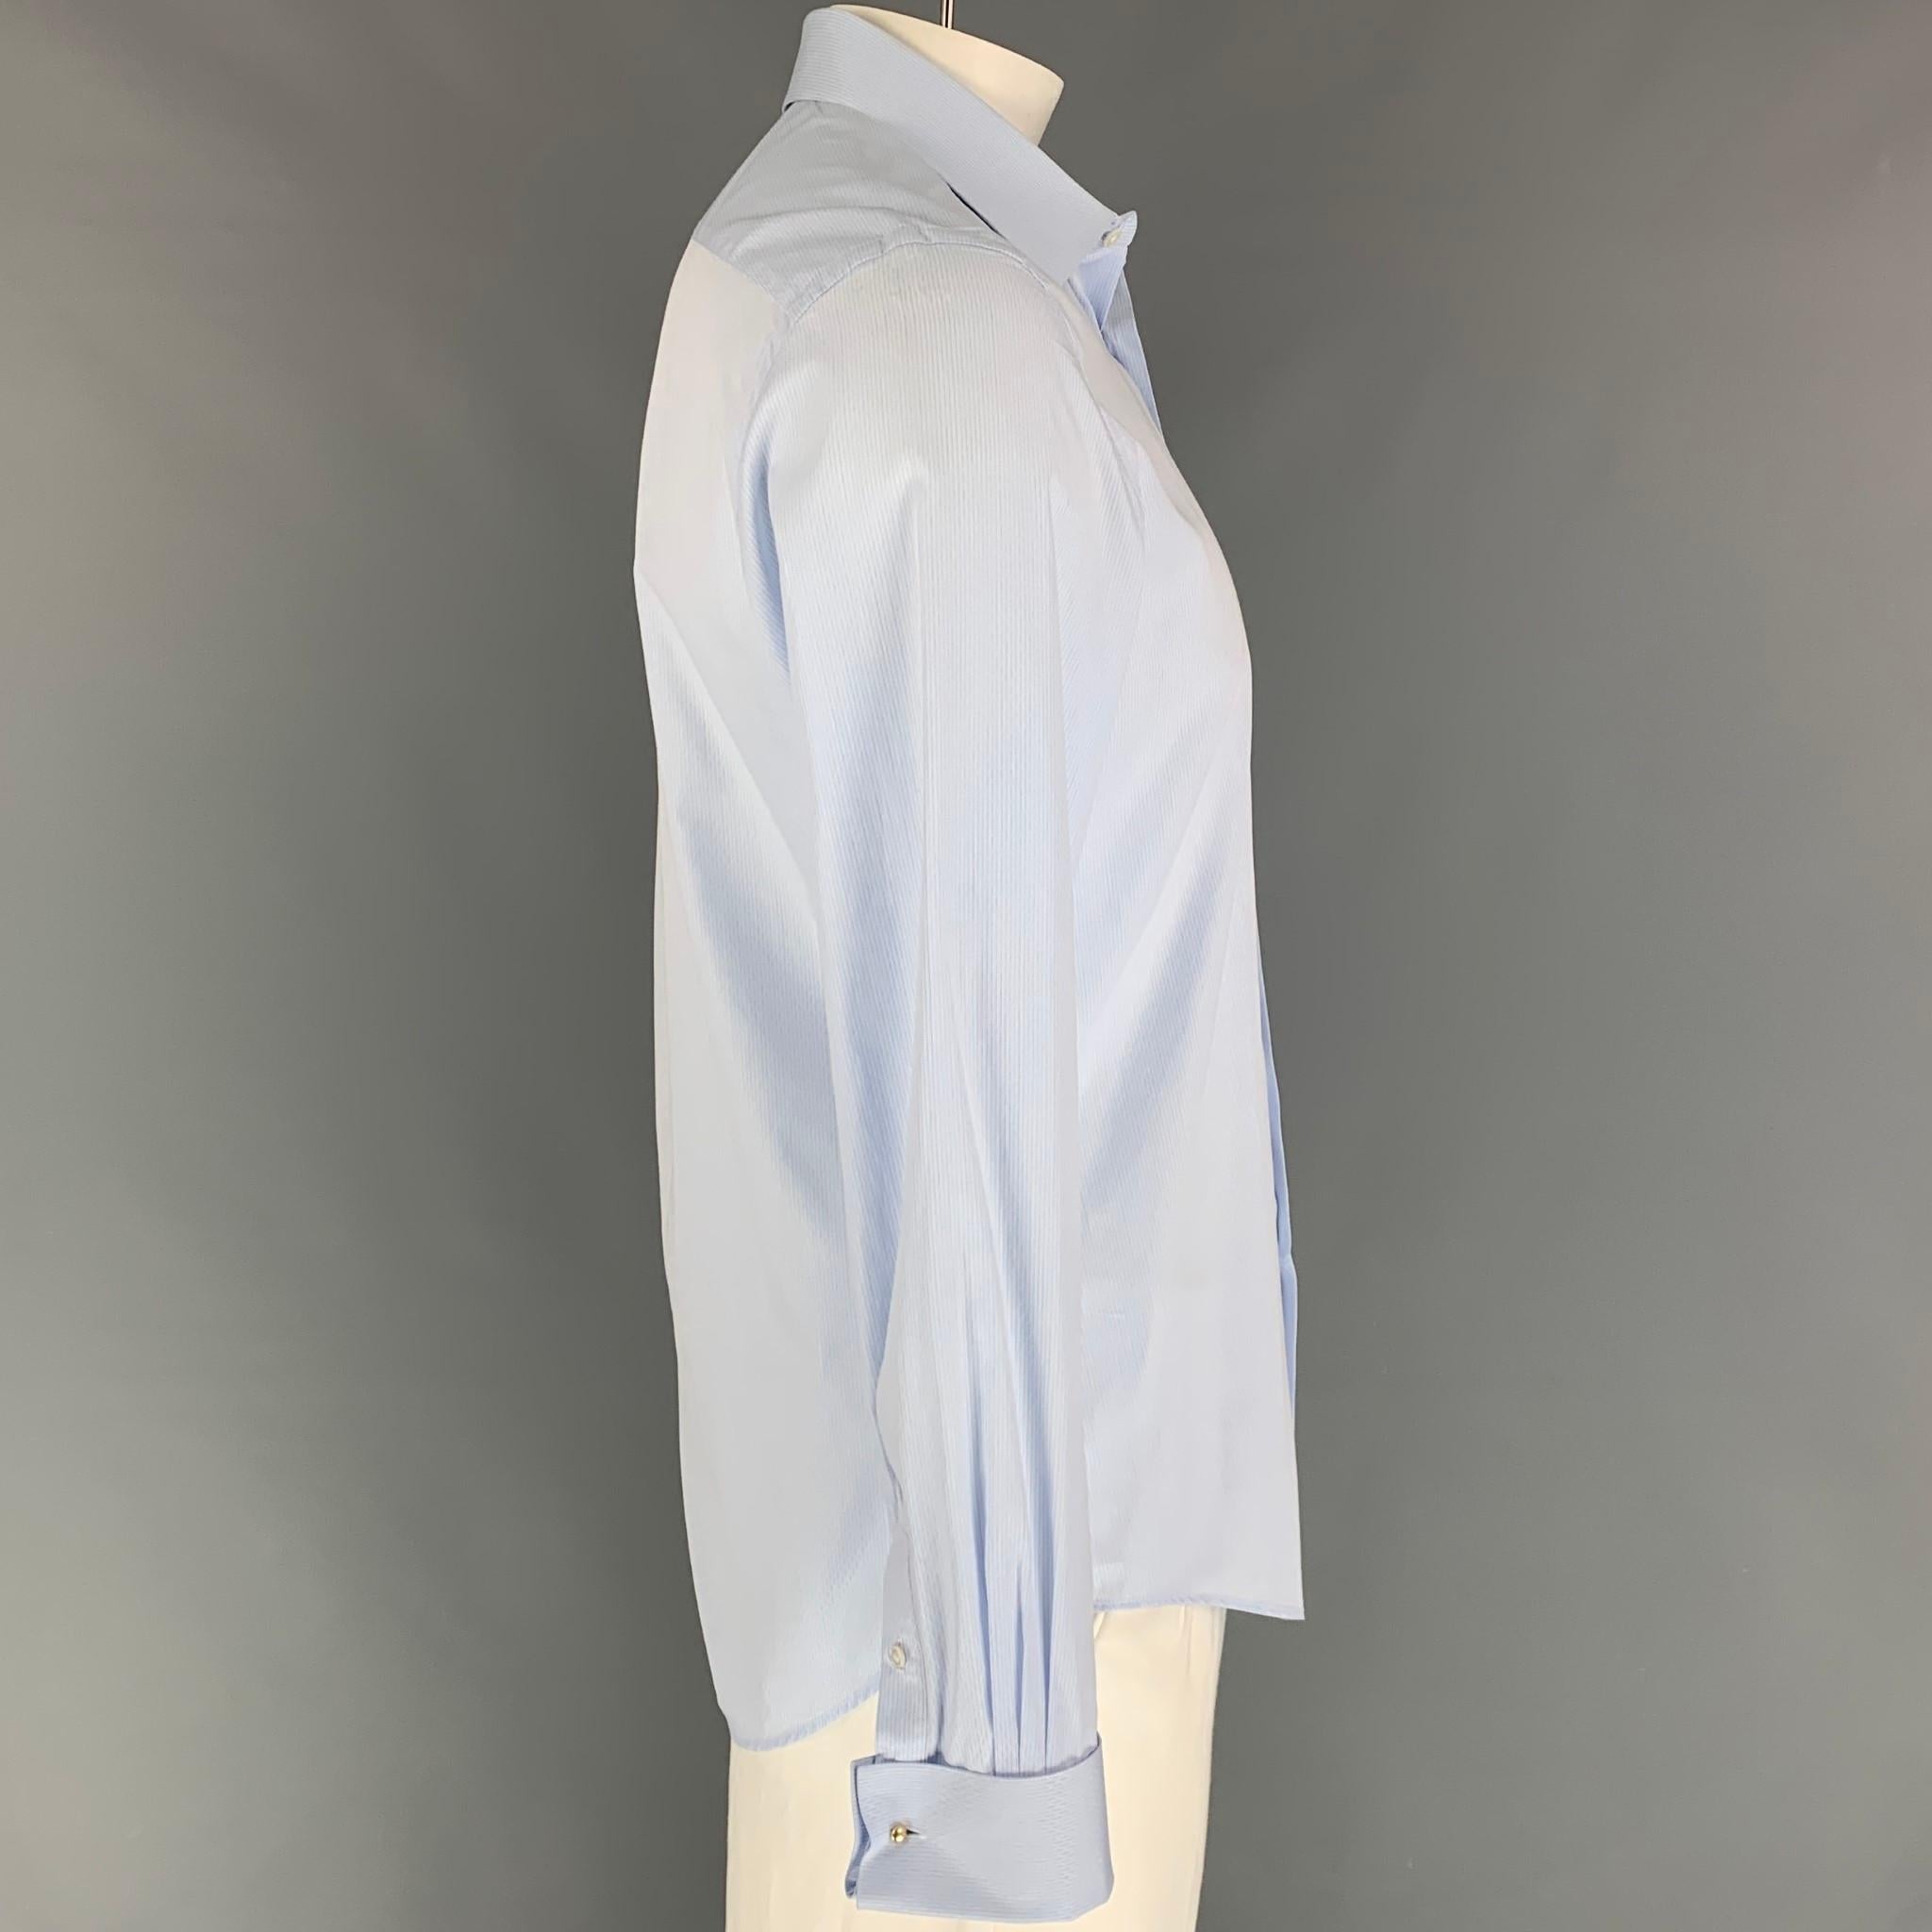 LOUIS VUITTON long sleeve shirt comes in a light blue print cotton featuring a slim fit, french cuffs, spread collar, and a button up closure. Made in Italy. 

Excellent Pre-Owned Condition.
Marked: 42/17

Measurements:

Shoulder: 18 in.
Chest: 42